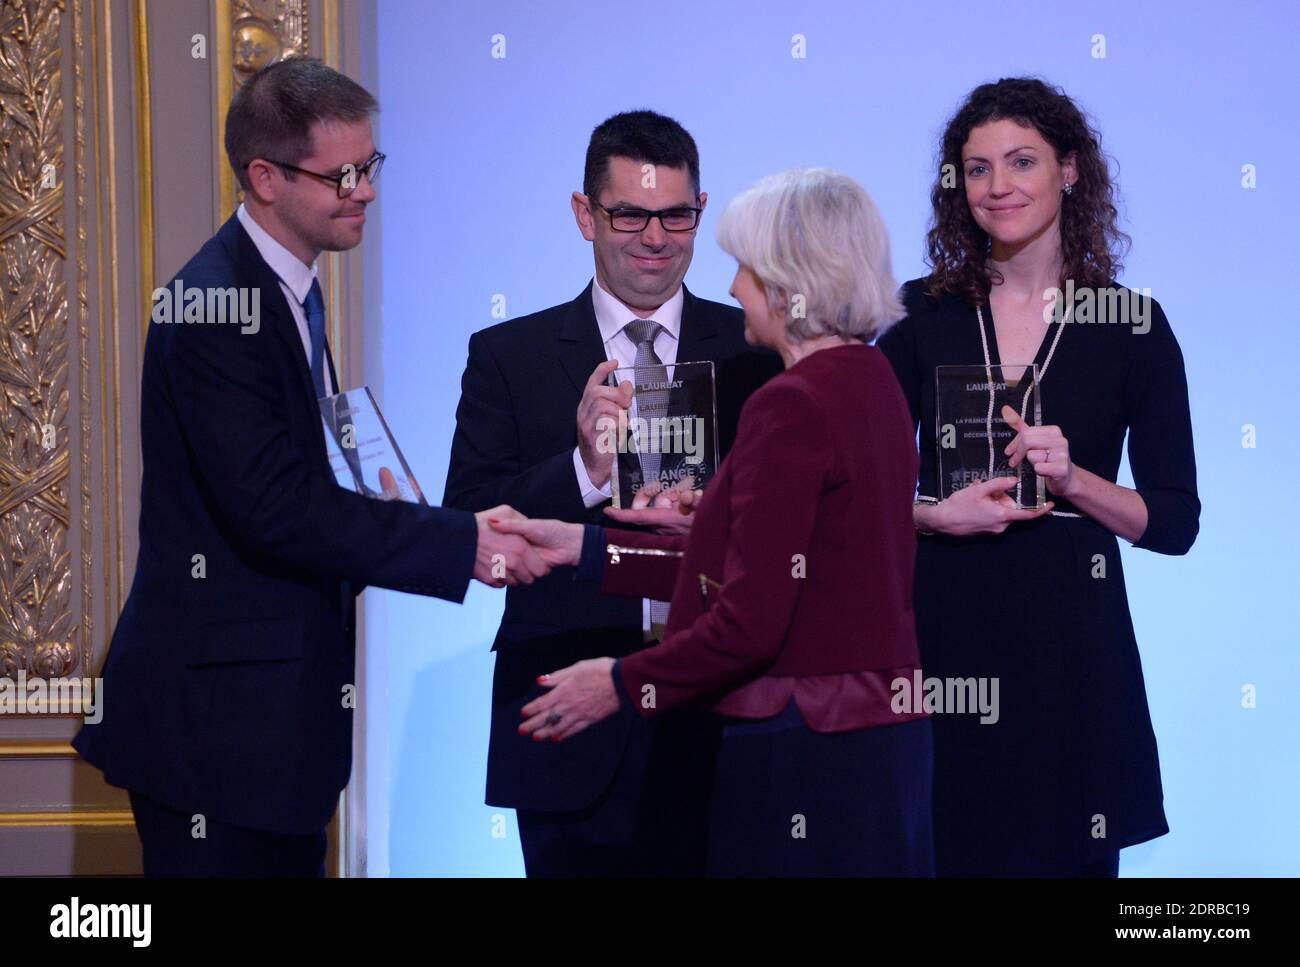 French ambassador for international climate negotiations Laurence Tubiana attends the La France S'Engage (France Makes A Stand) award ceremony at the Elysee presidential palace In Paris, France on December 22, 2015. Photo by Christian Liewig/ABACAPRESS.COM Stock Photo